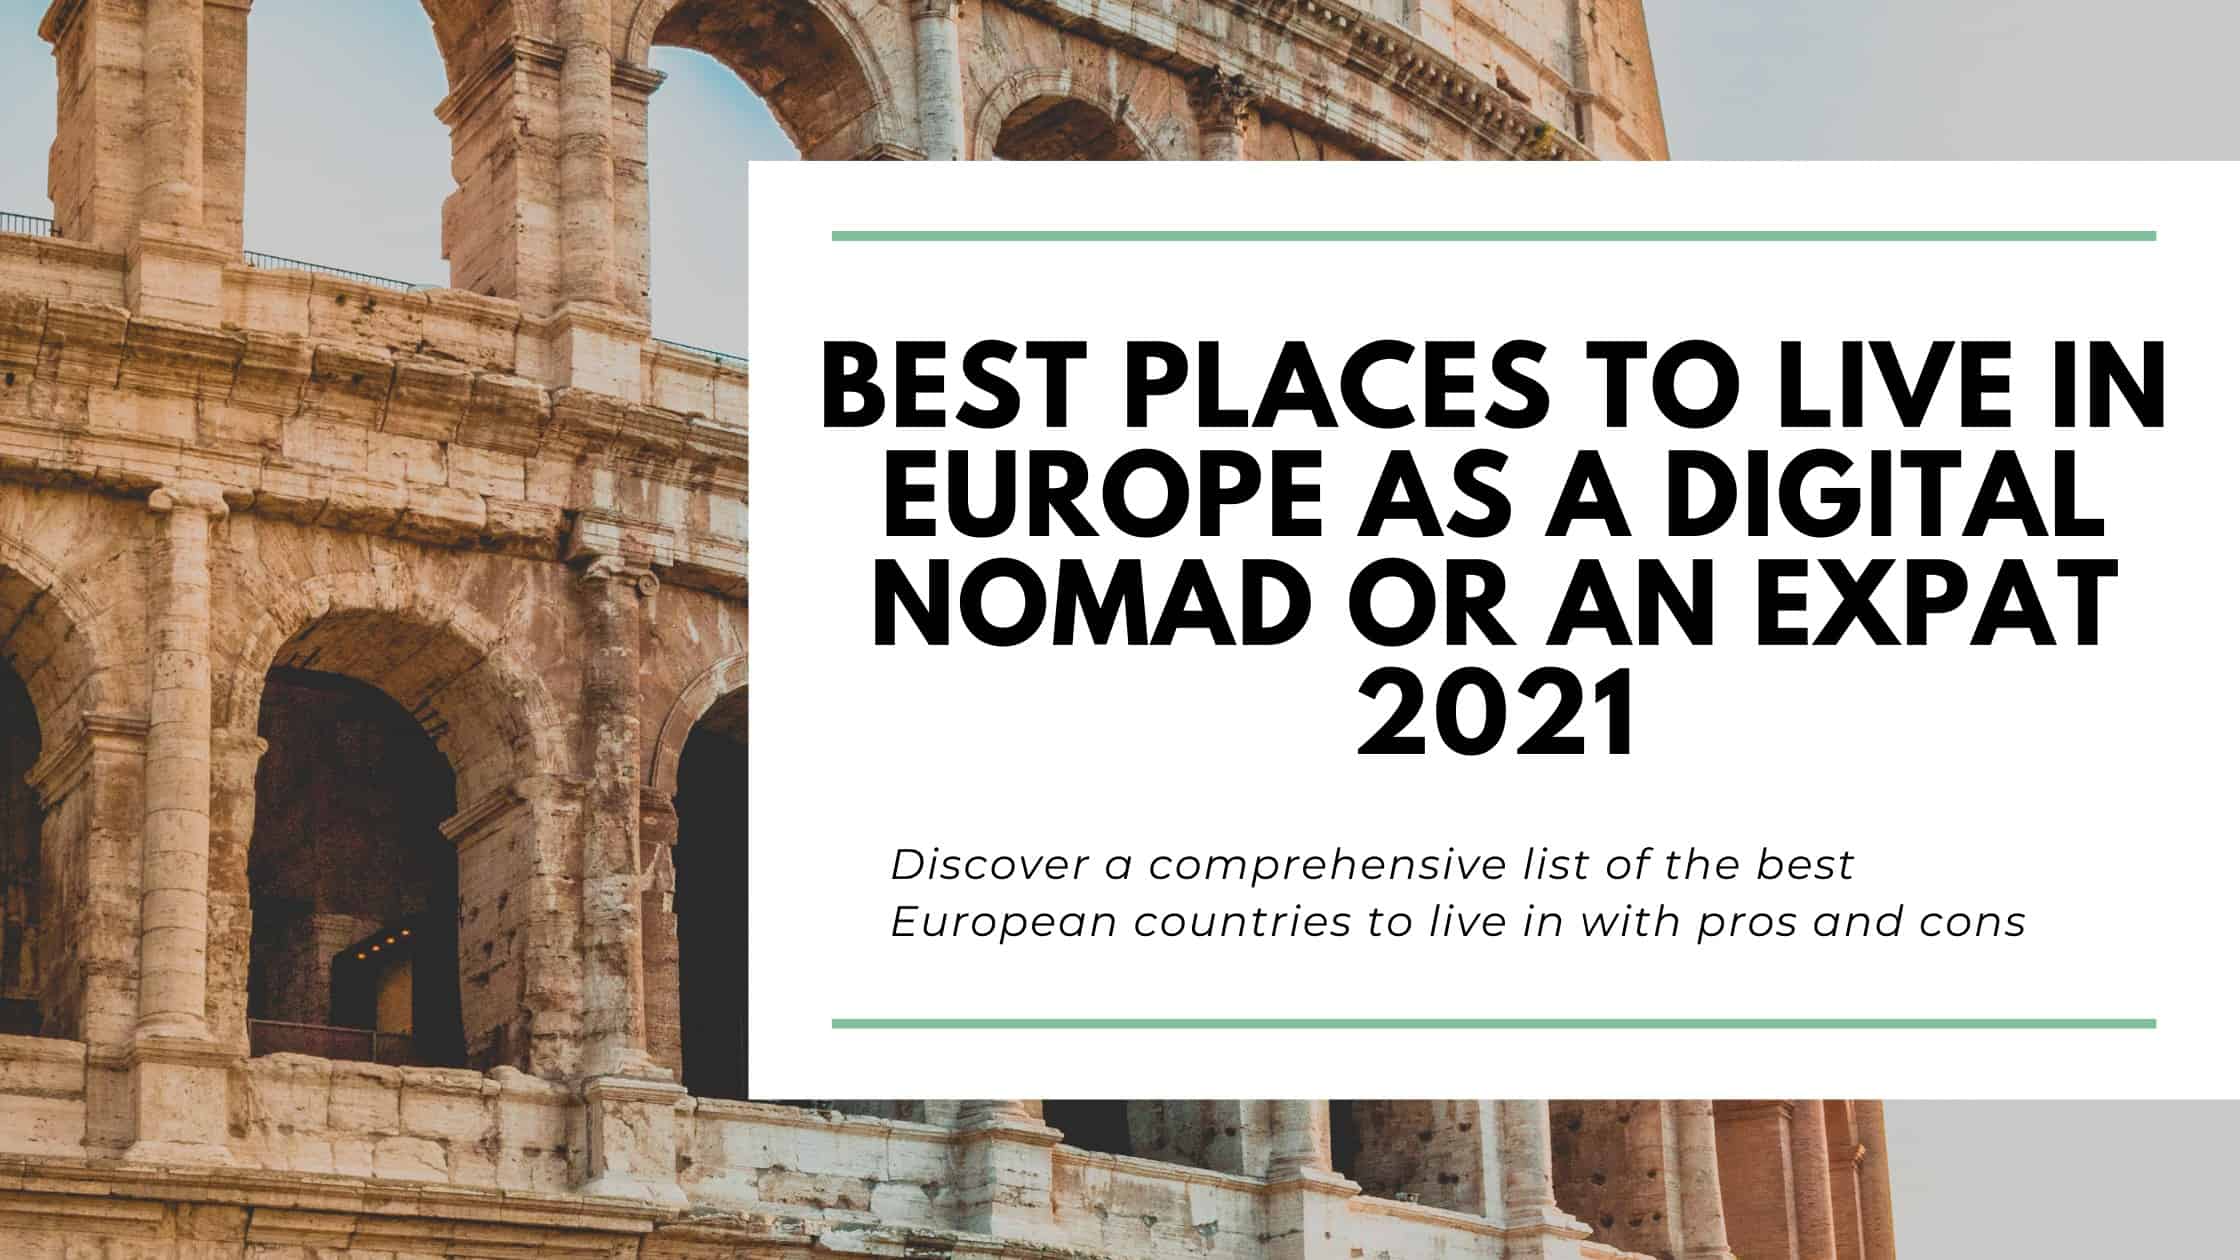 Best Places to Live in Europe as a Digital Nomad or an Expat In 2021